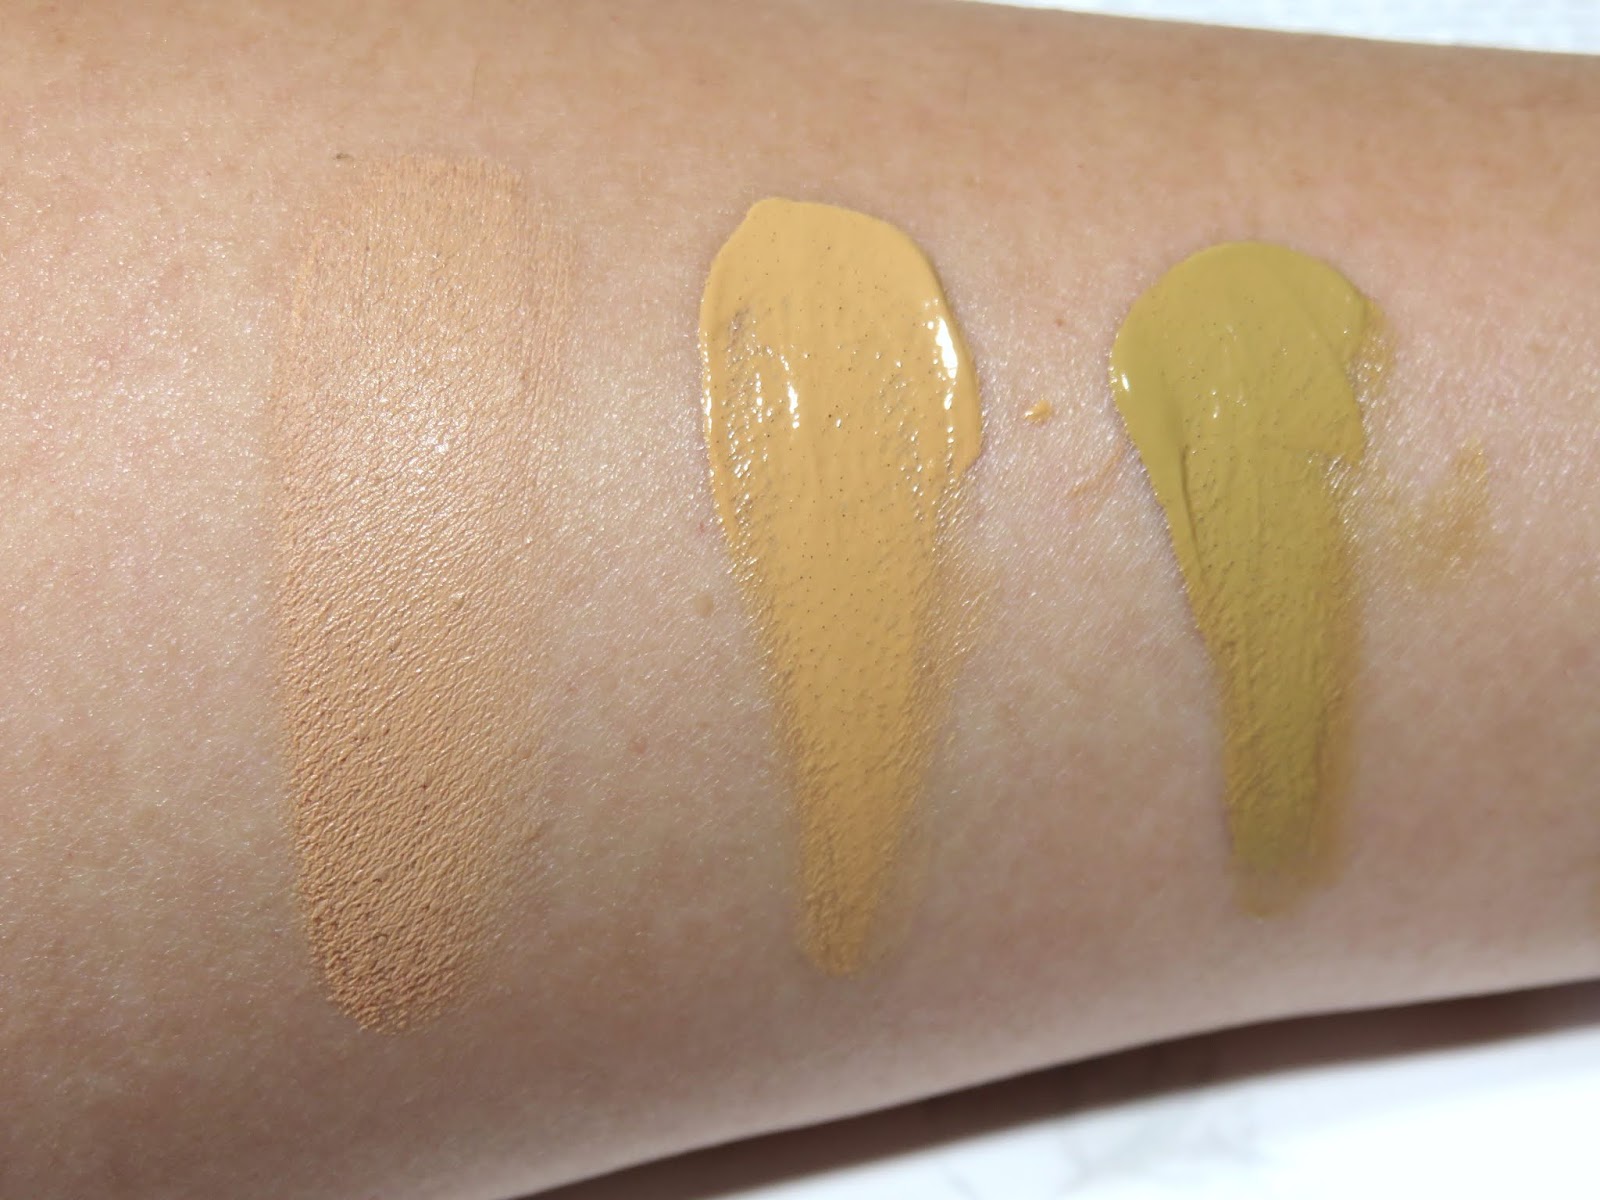 Giorgio Armani Beauty Neo Nude Foundation Review and Swatches